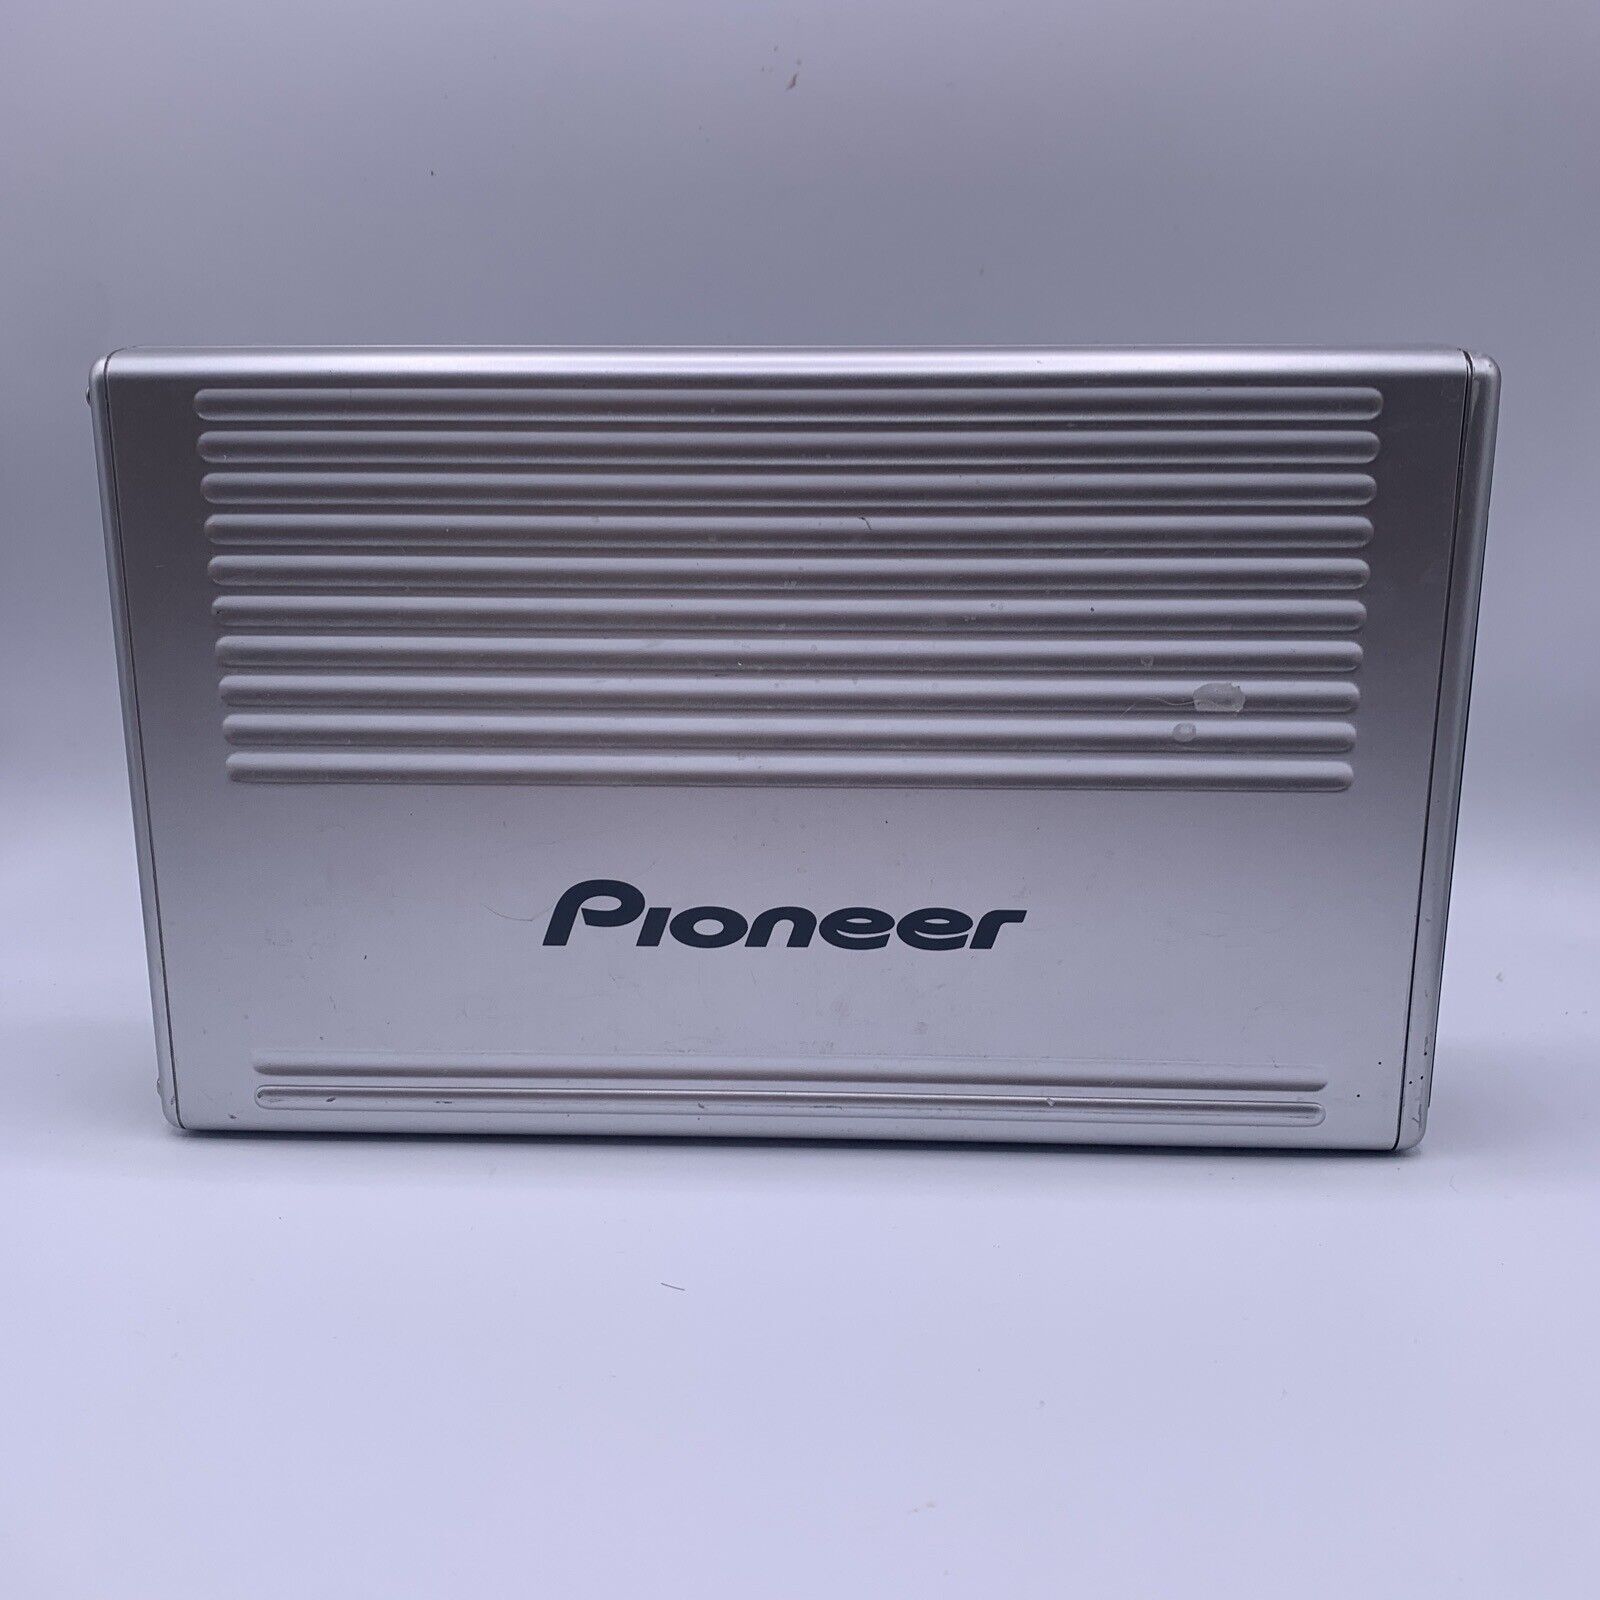 Pioneer DVR-S706 Usb Connection External Dvd CD Writer Drive w/ power cable